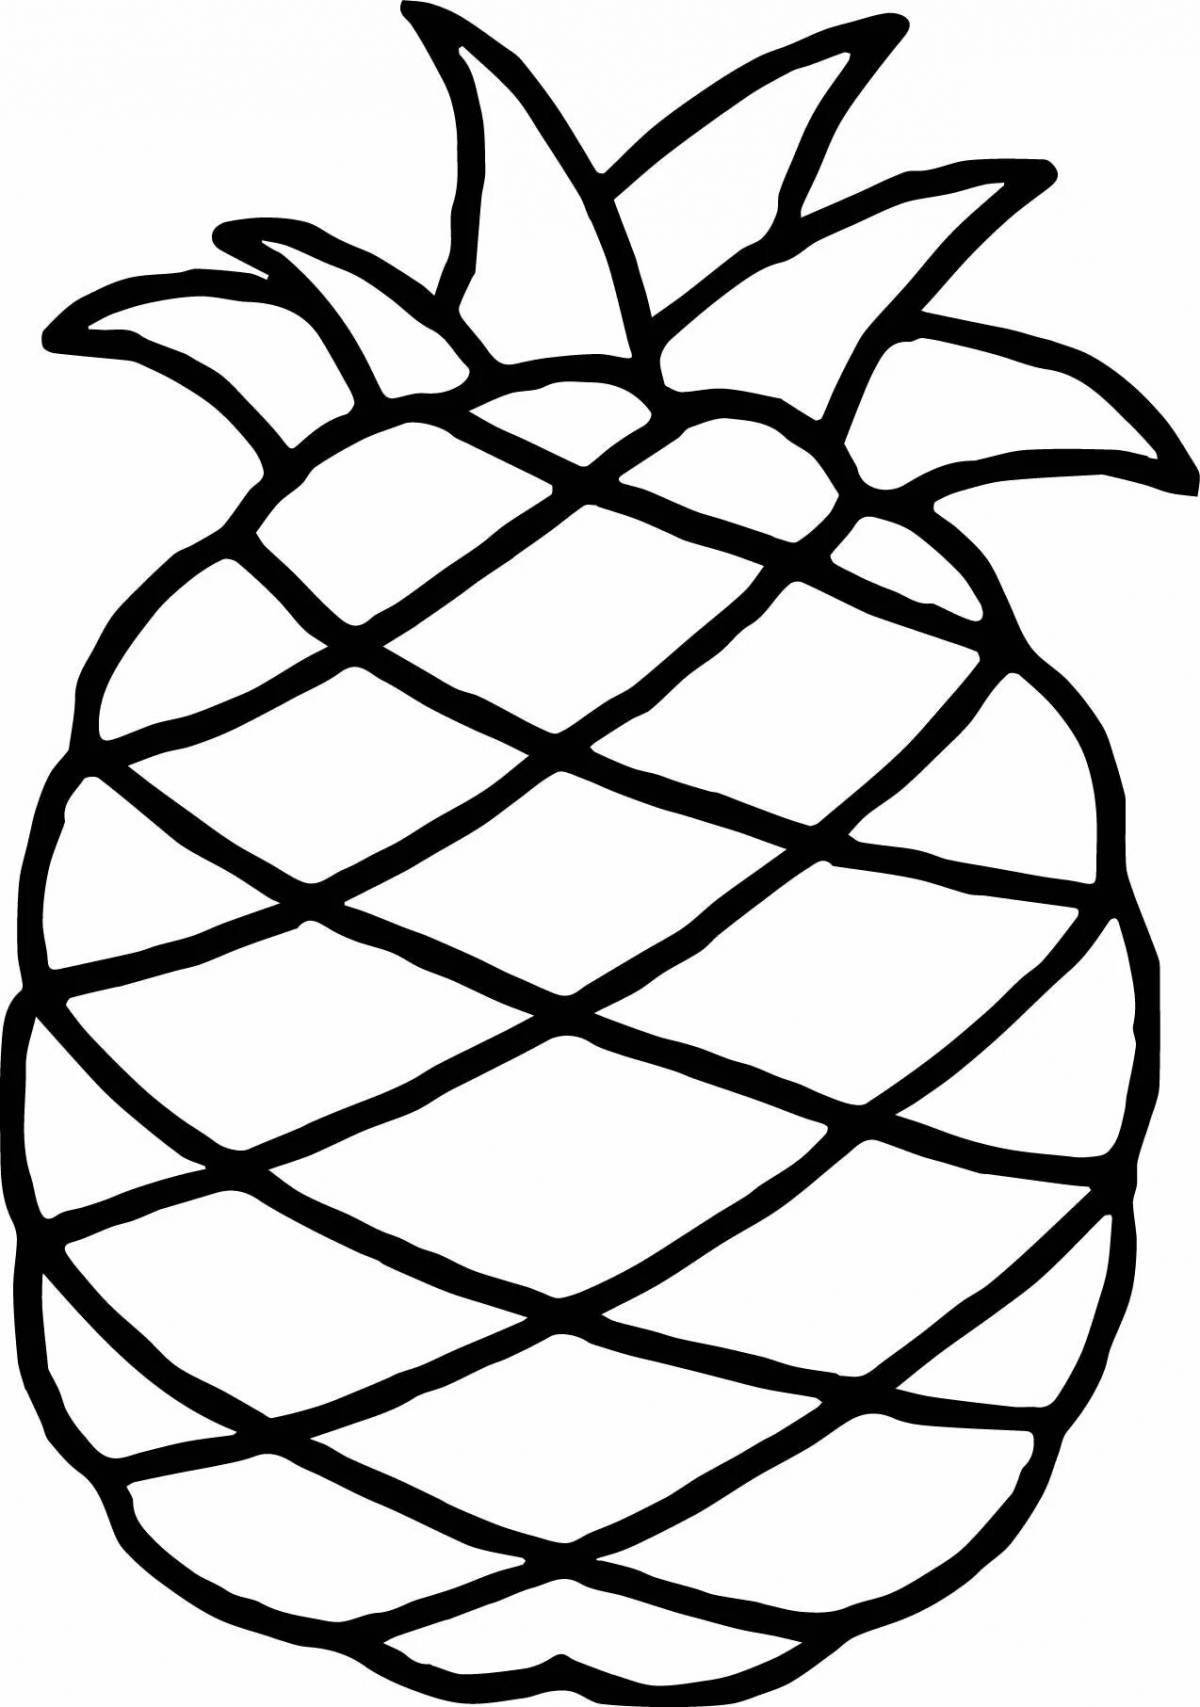 Playful pineapple coloring page for kids